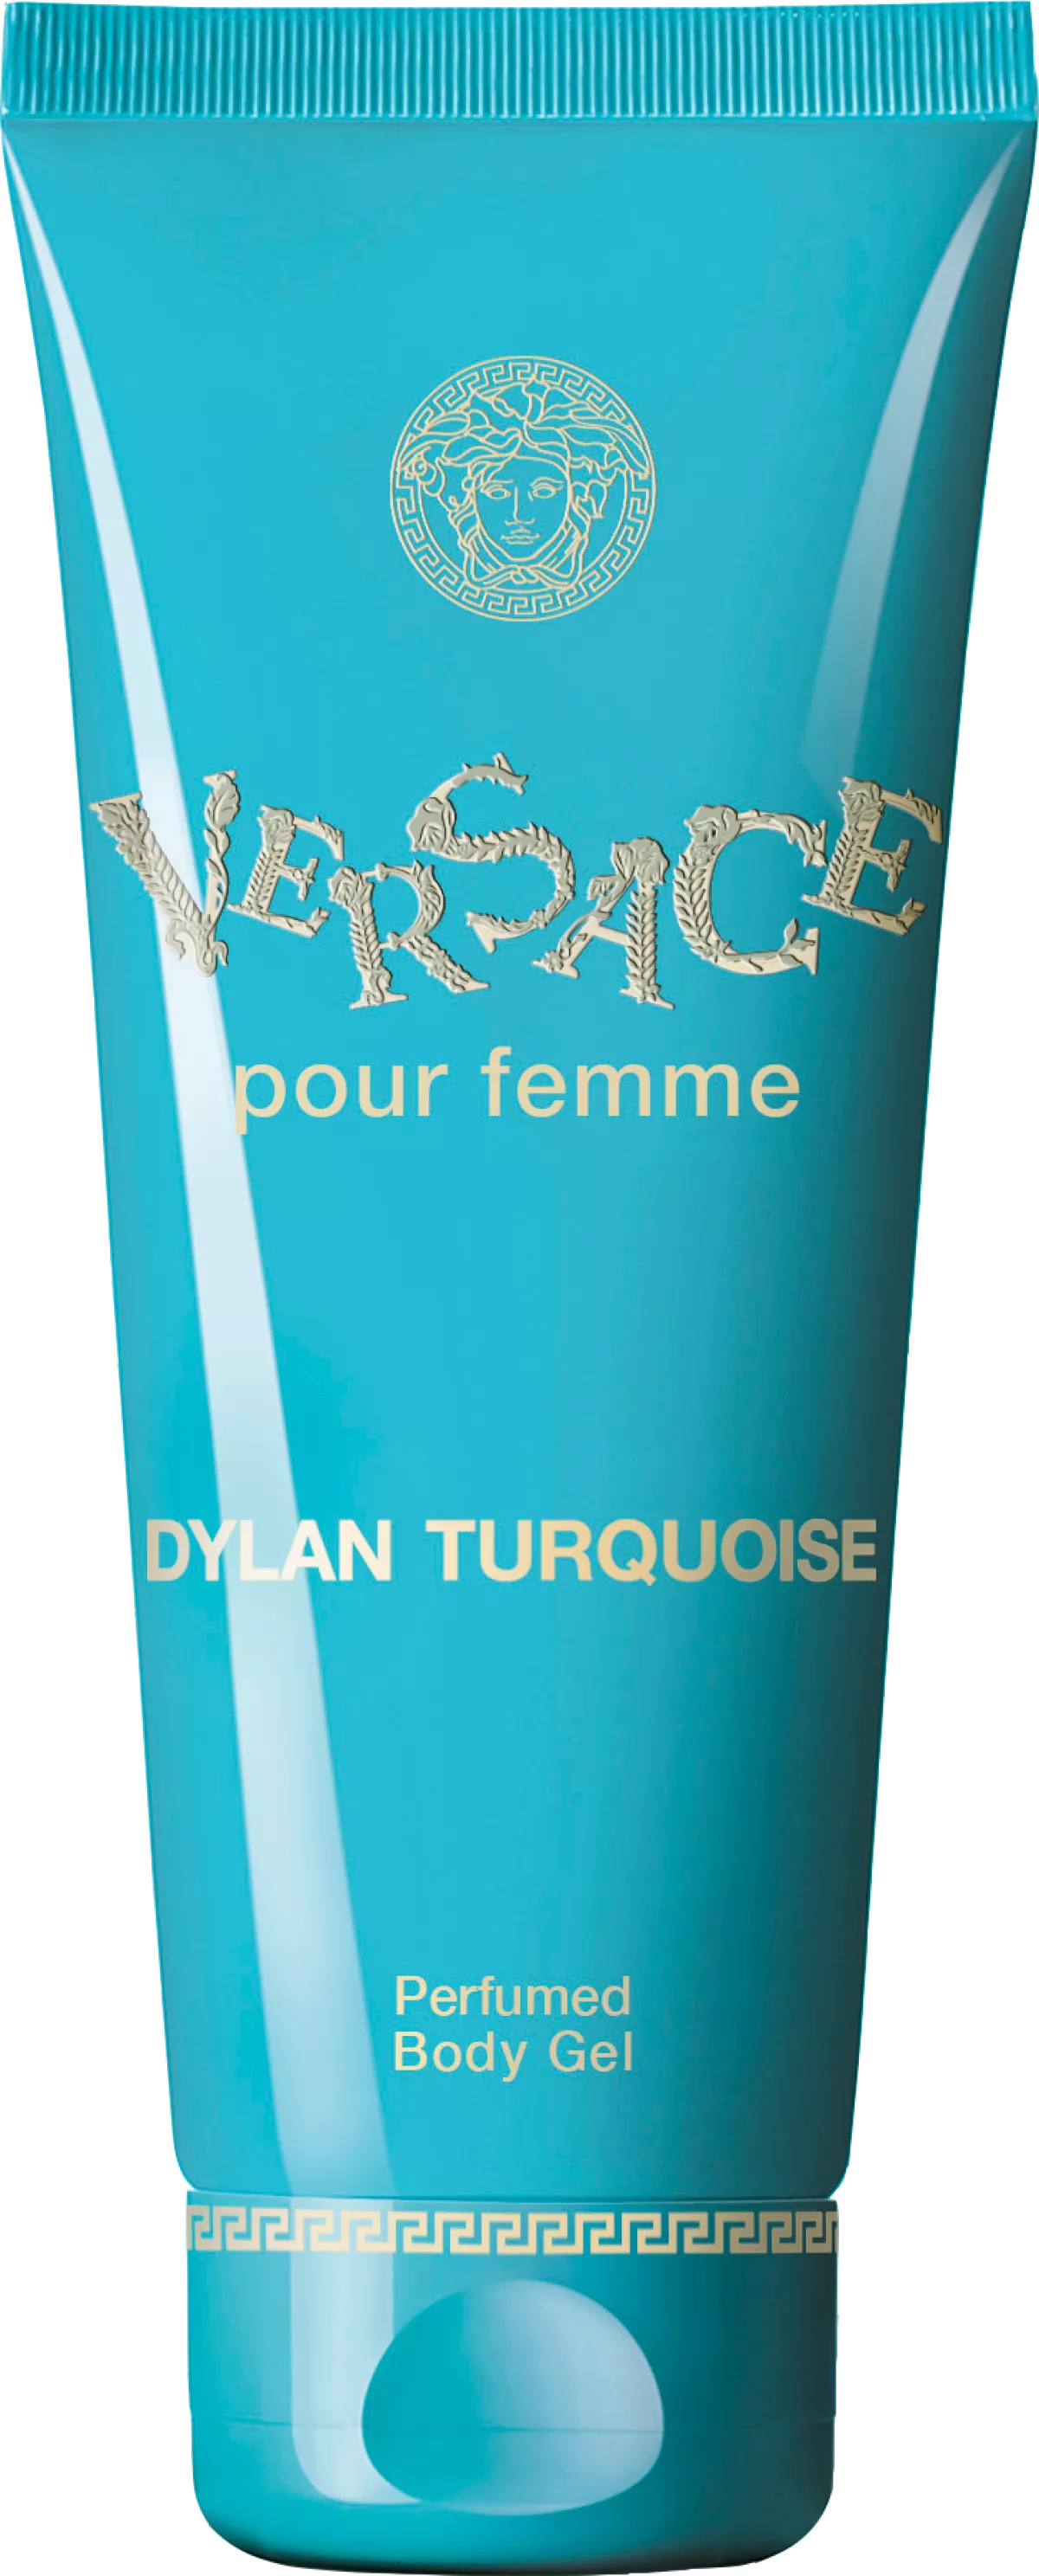 Versace - Pour Femme Dylan Turquoise Body Gel 200 ml